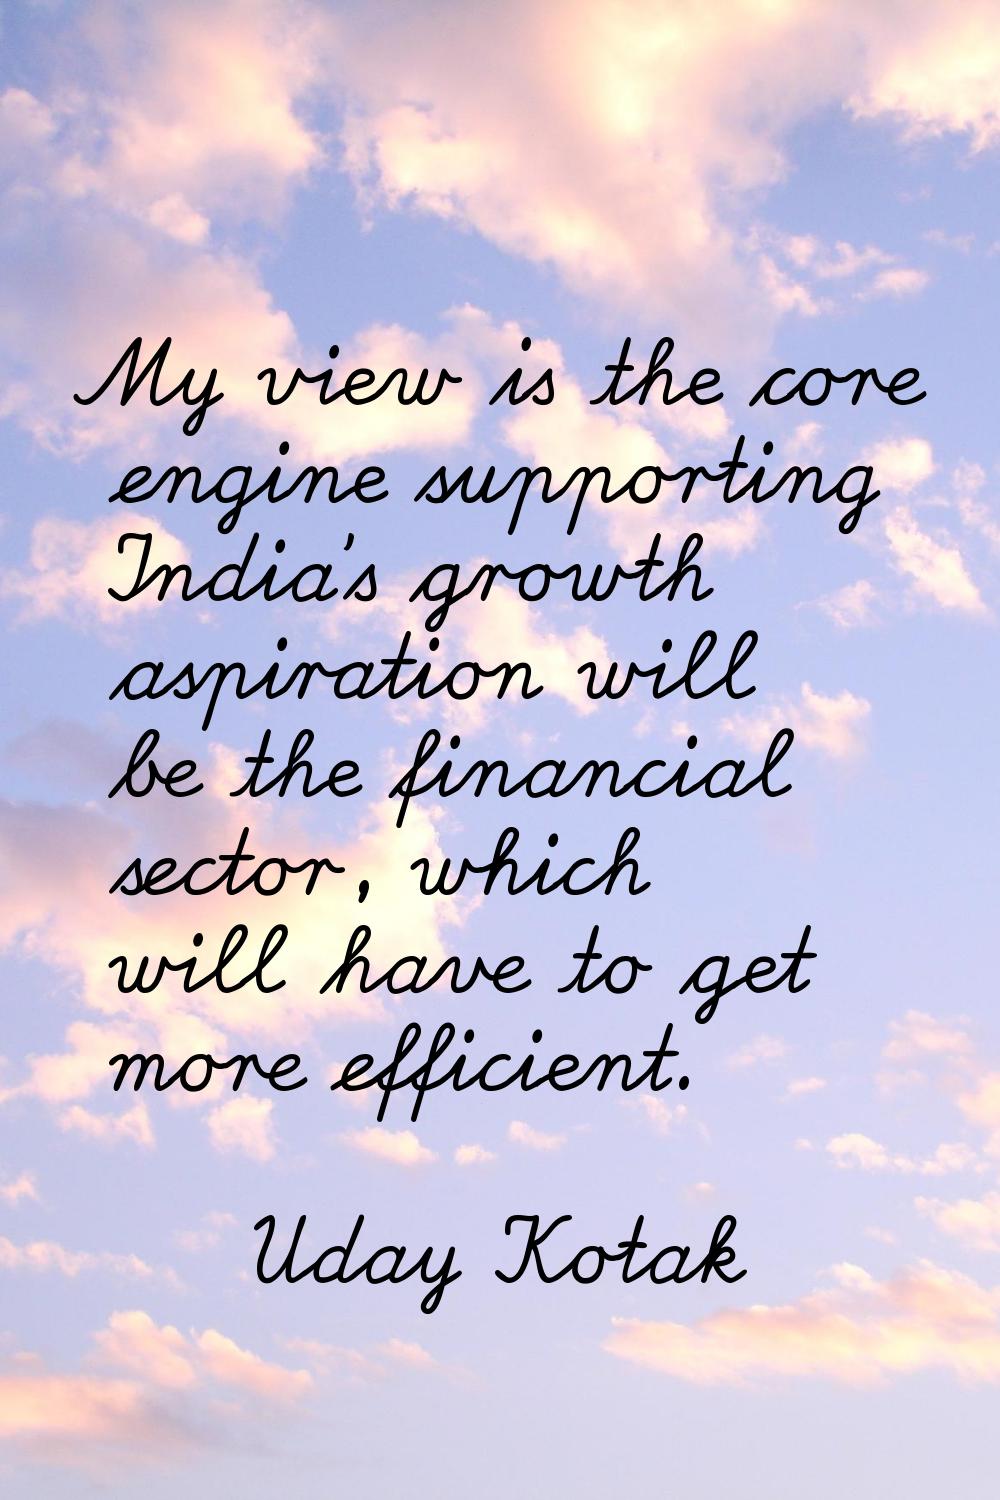 My view is the core engine supporting India's growth aspiration will be the financial sector, which